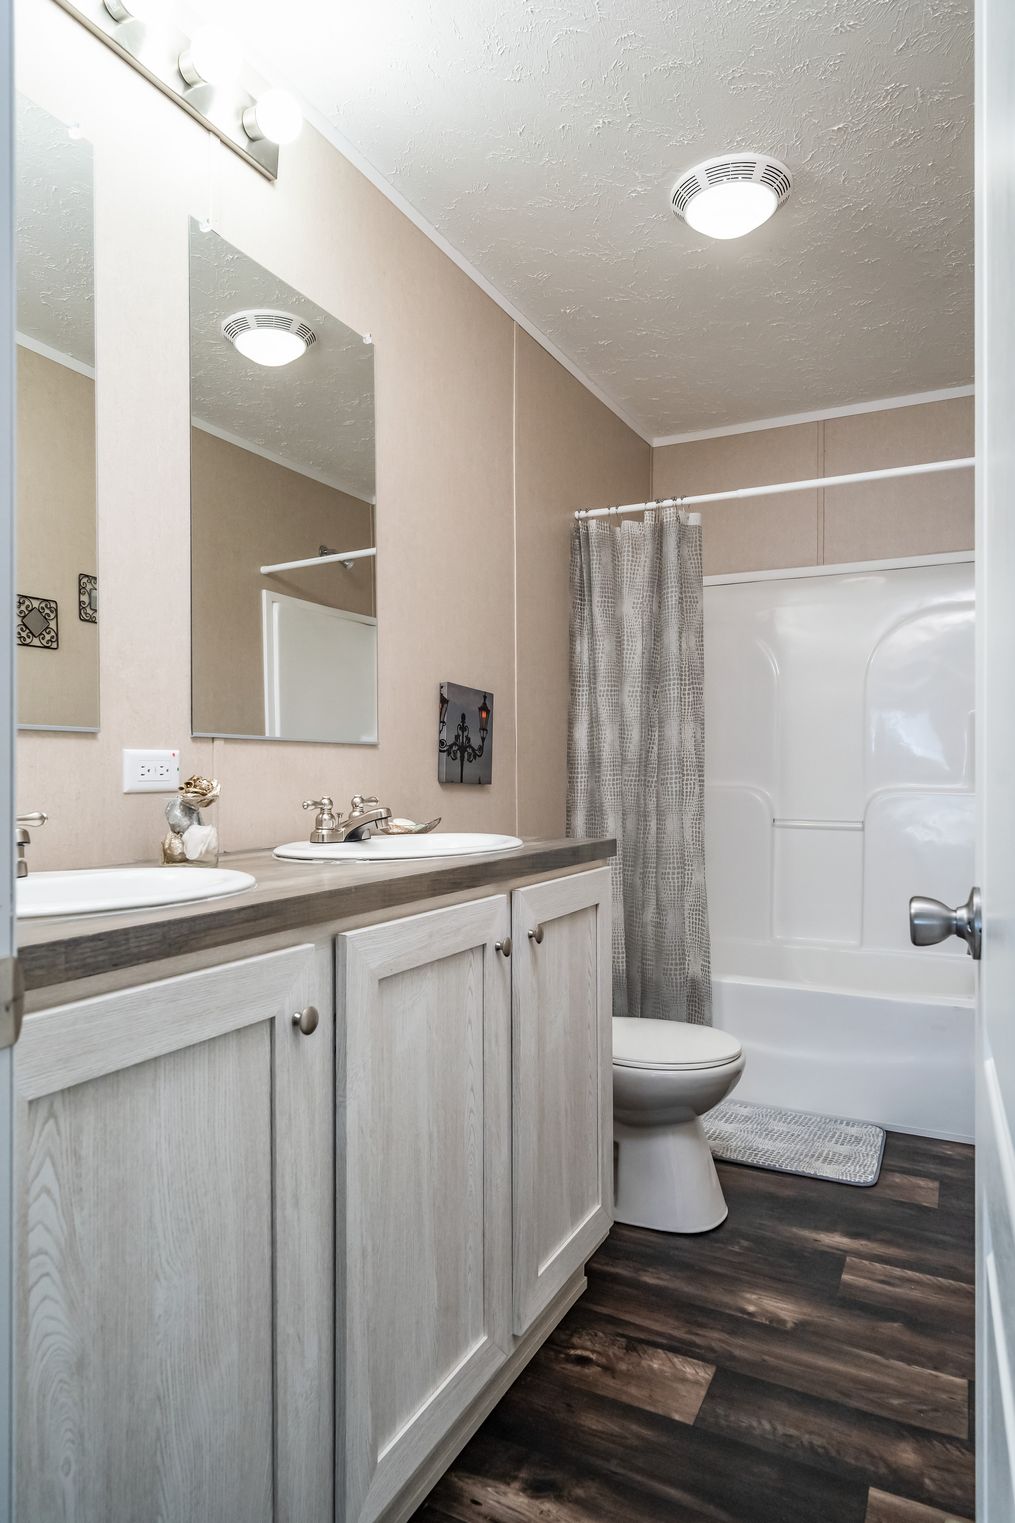 The ULTRA PRO BIG BOY Guest Bathroom. This Manufactured Mobile Home features 4 bedrooms and 2 baths.